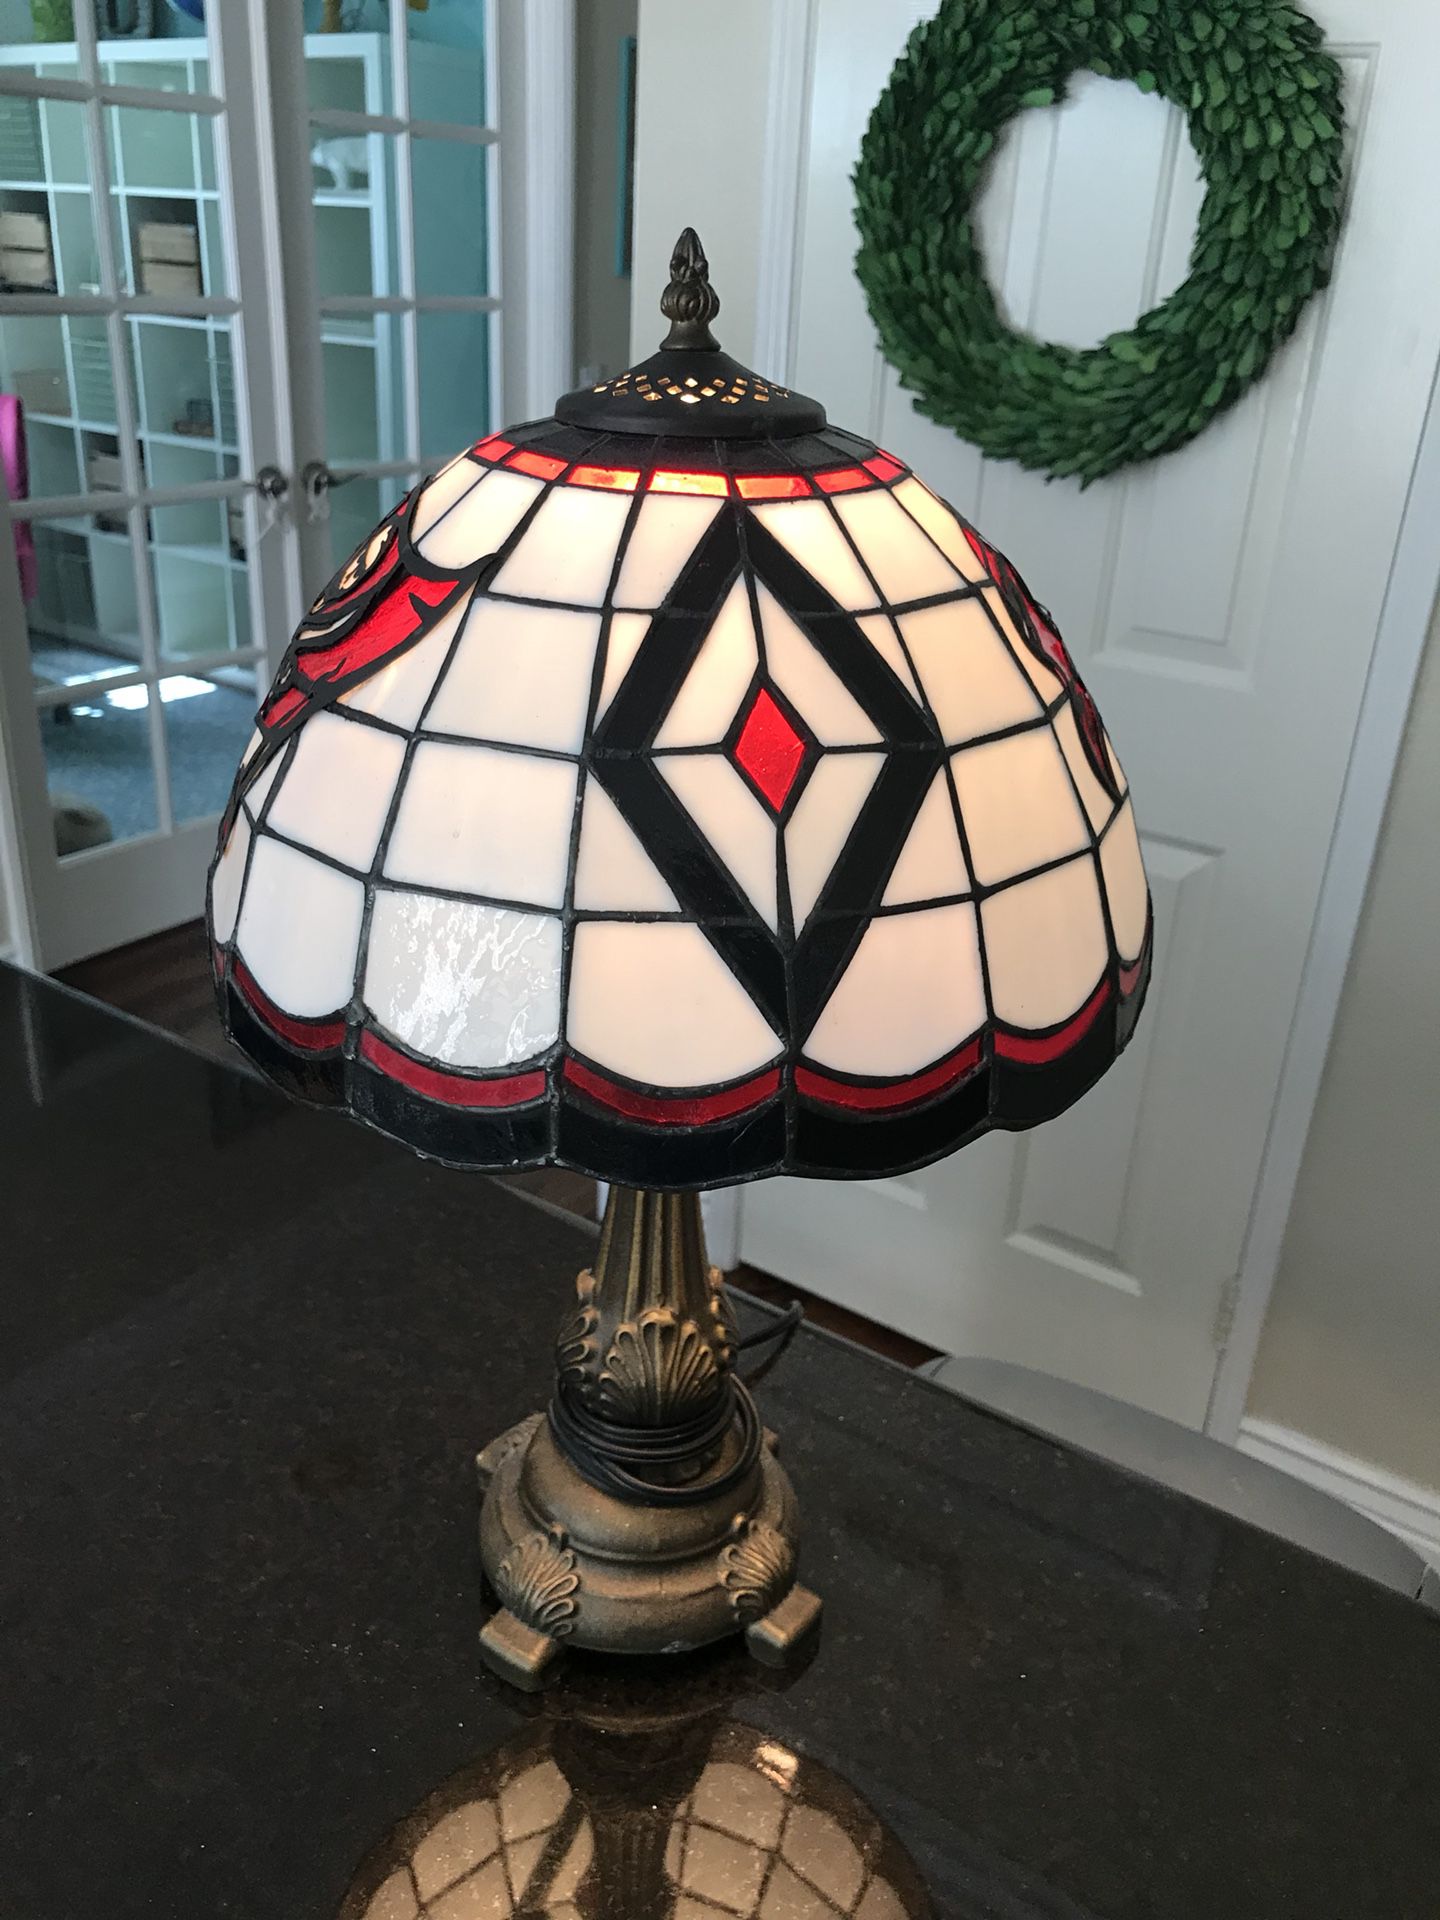 Tampa Bay Buccaneers Tiffany Lamp for Sale in Ladera Ranch, CA - OfferUp